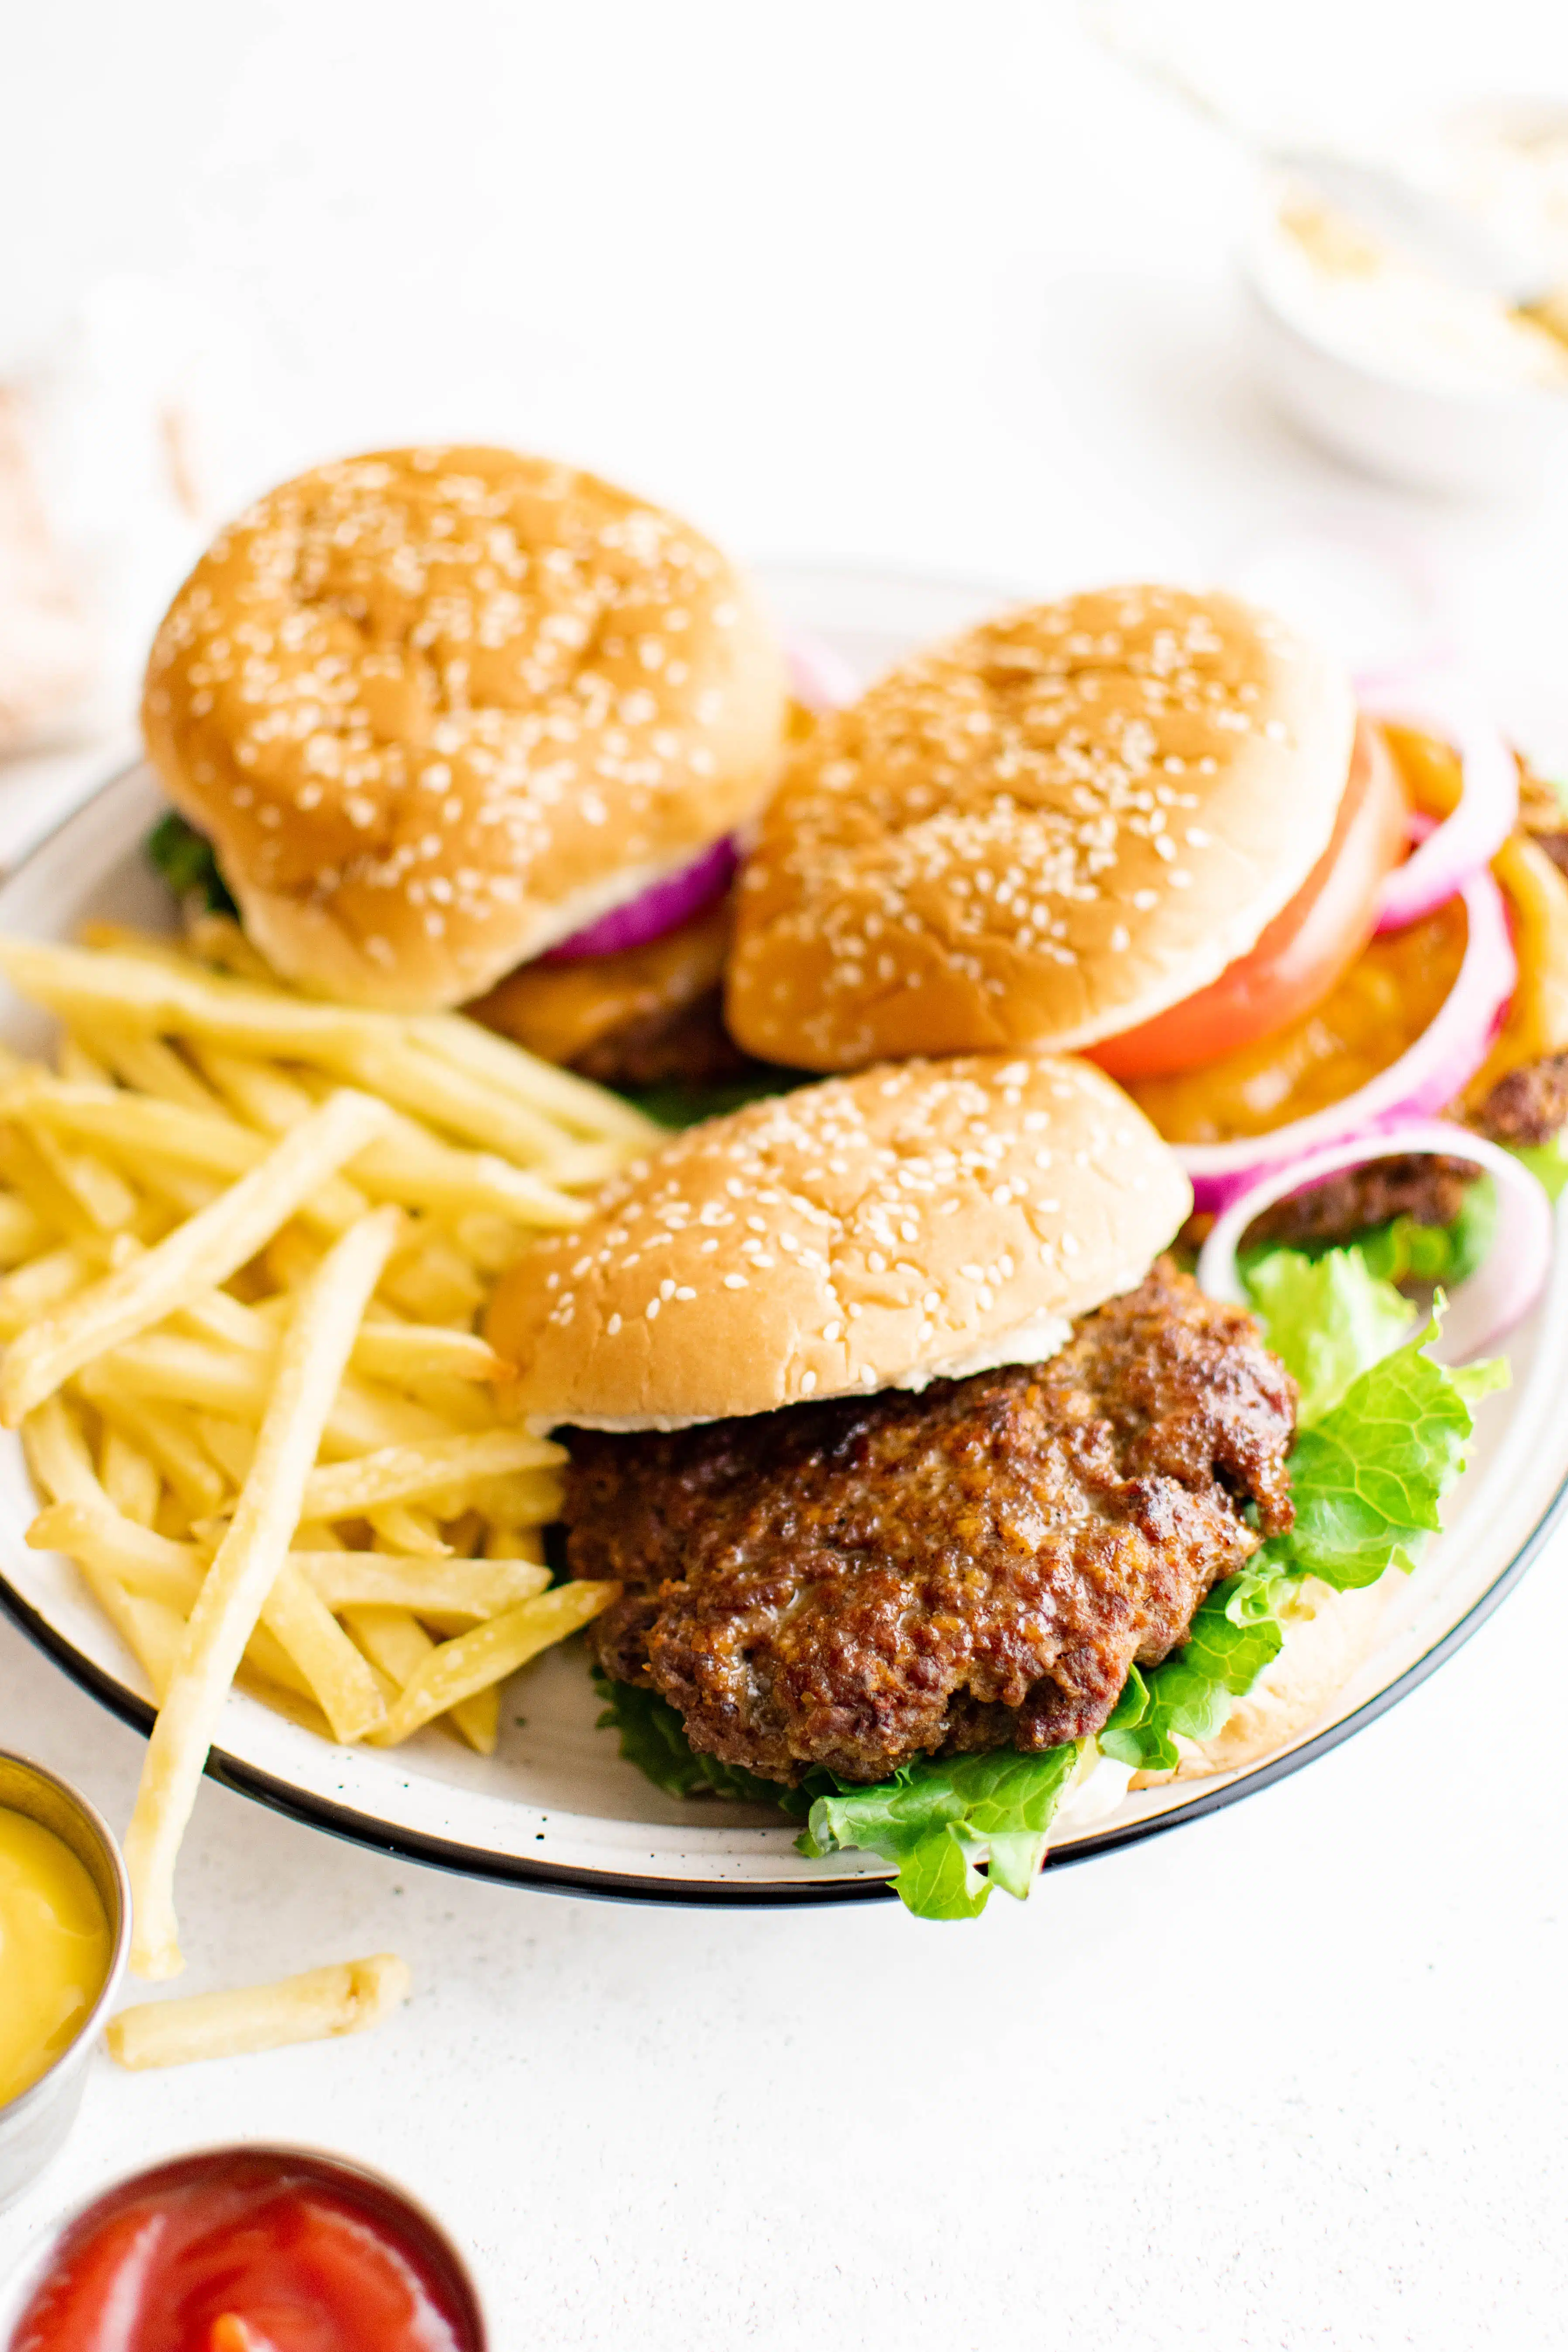 White plate with three prepared hamburgers on sesame buns with a side of potato fries.